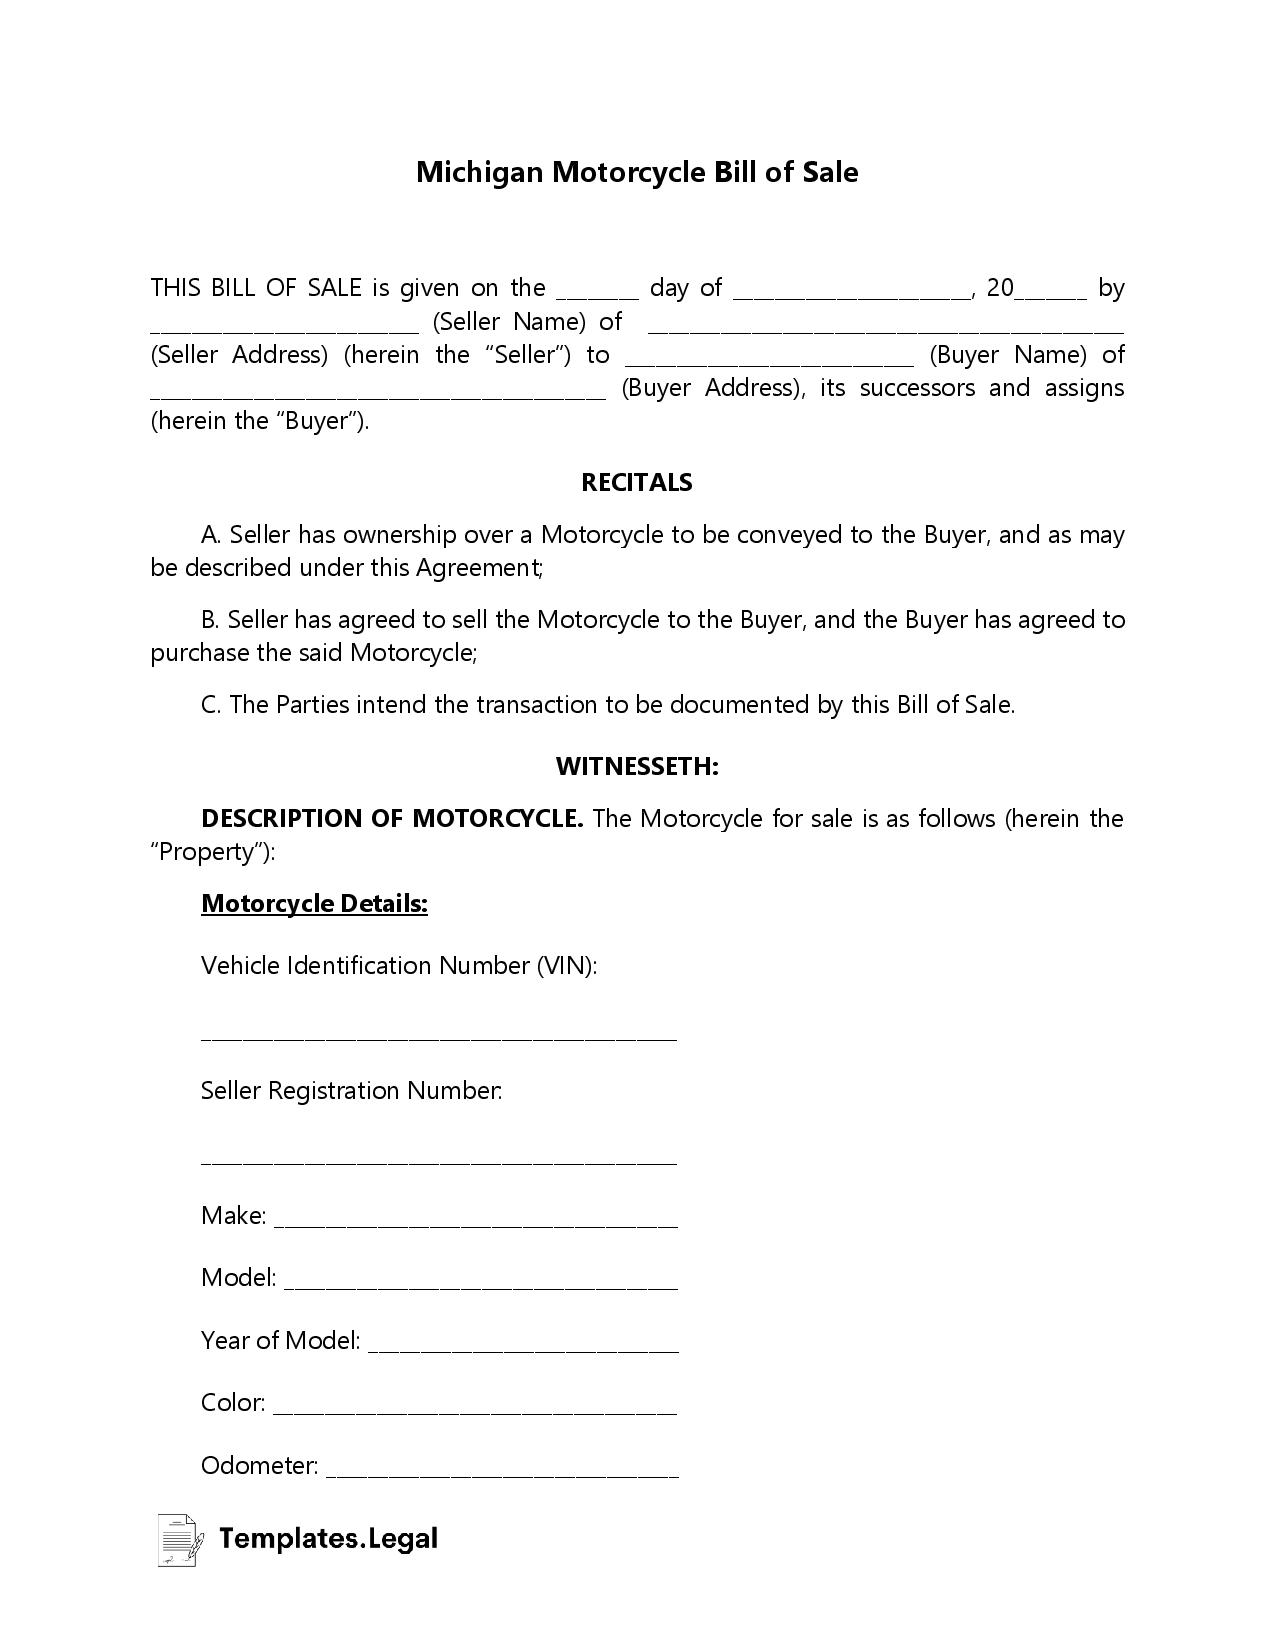 Michigan Motorcycle Bill of Sale - Templates.Legal